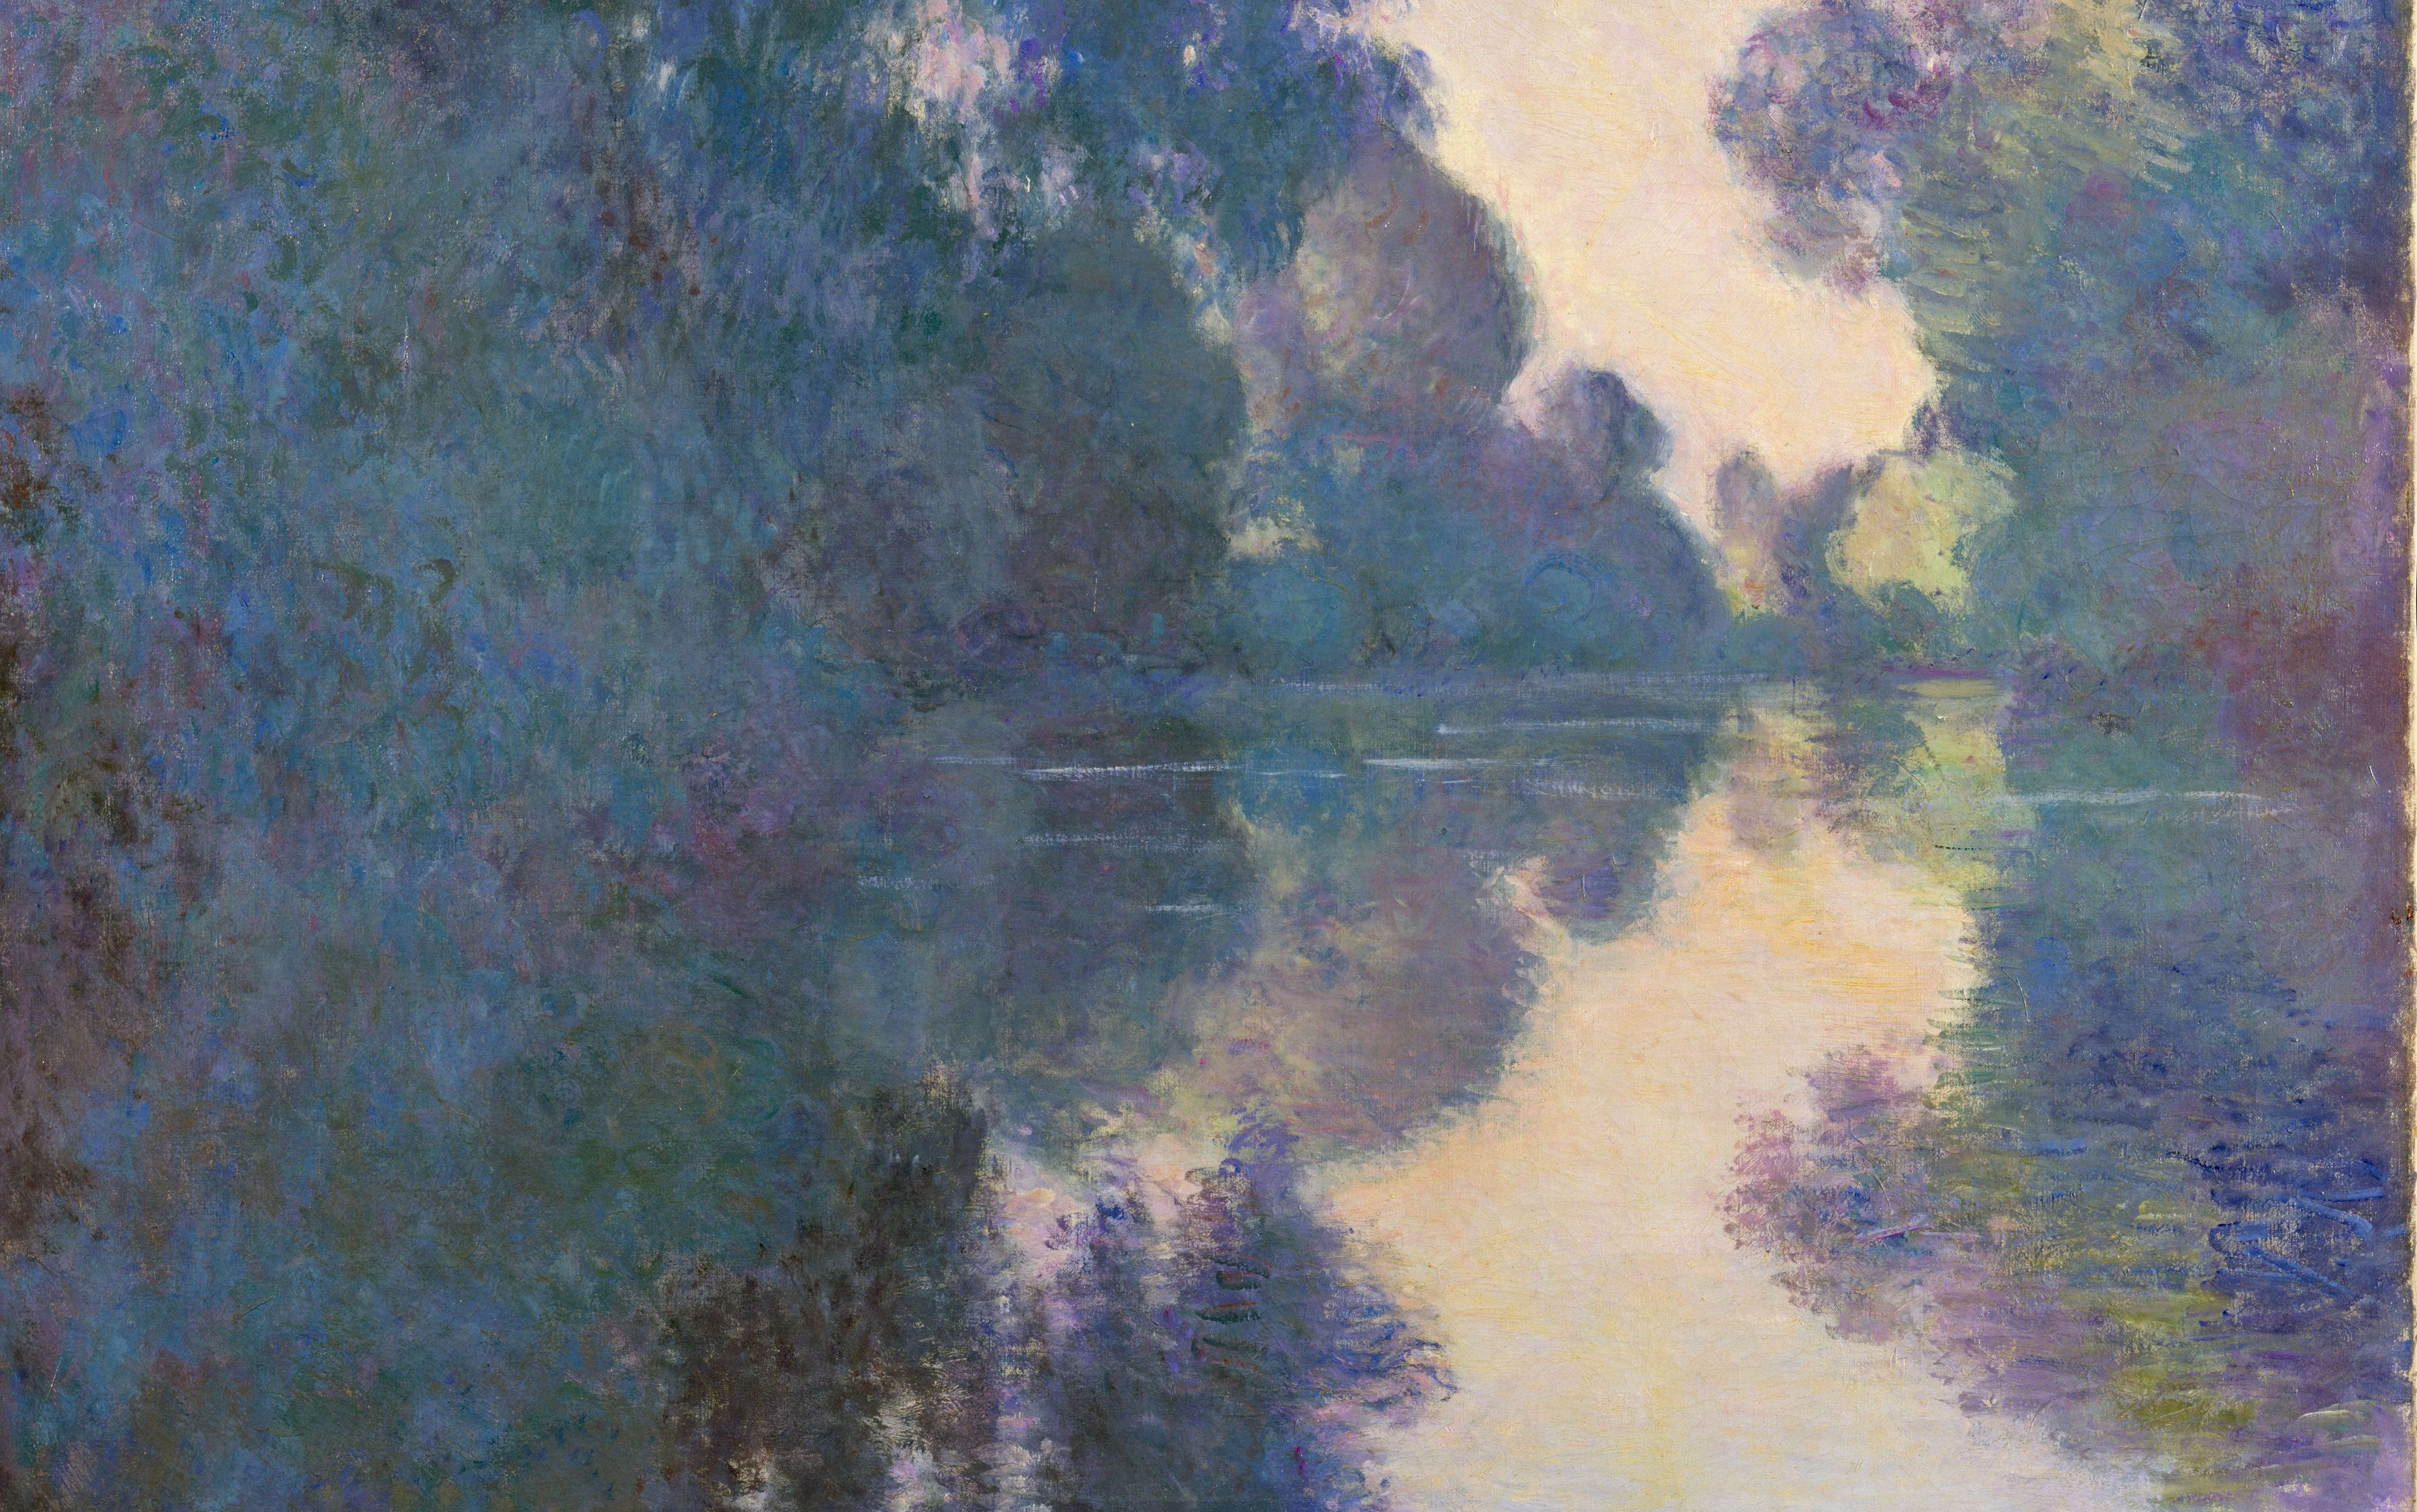 Monet: Morning on the Seine near Giverny 1897